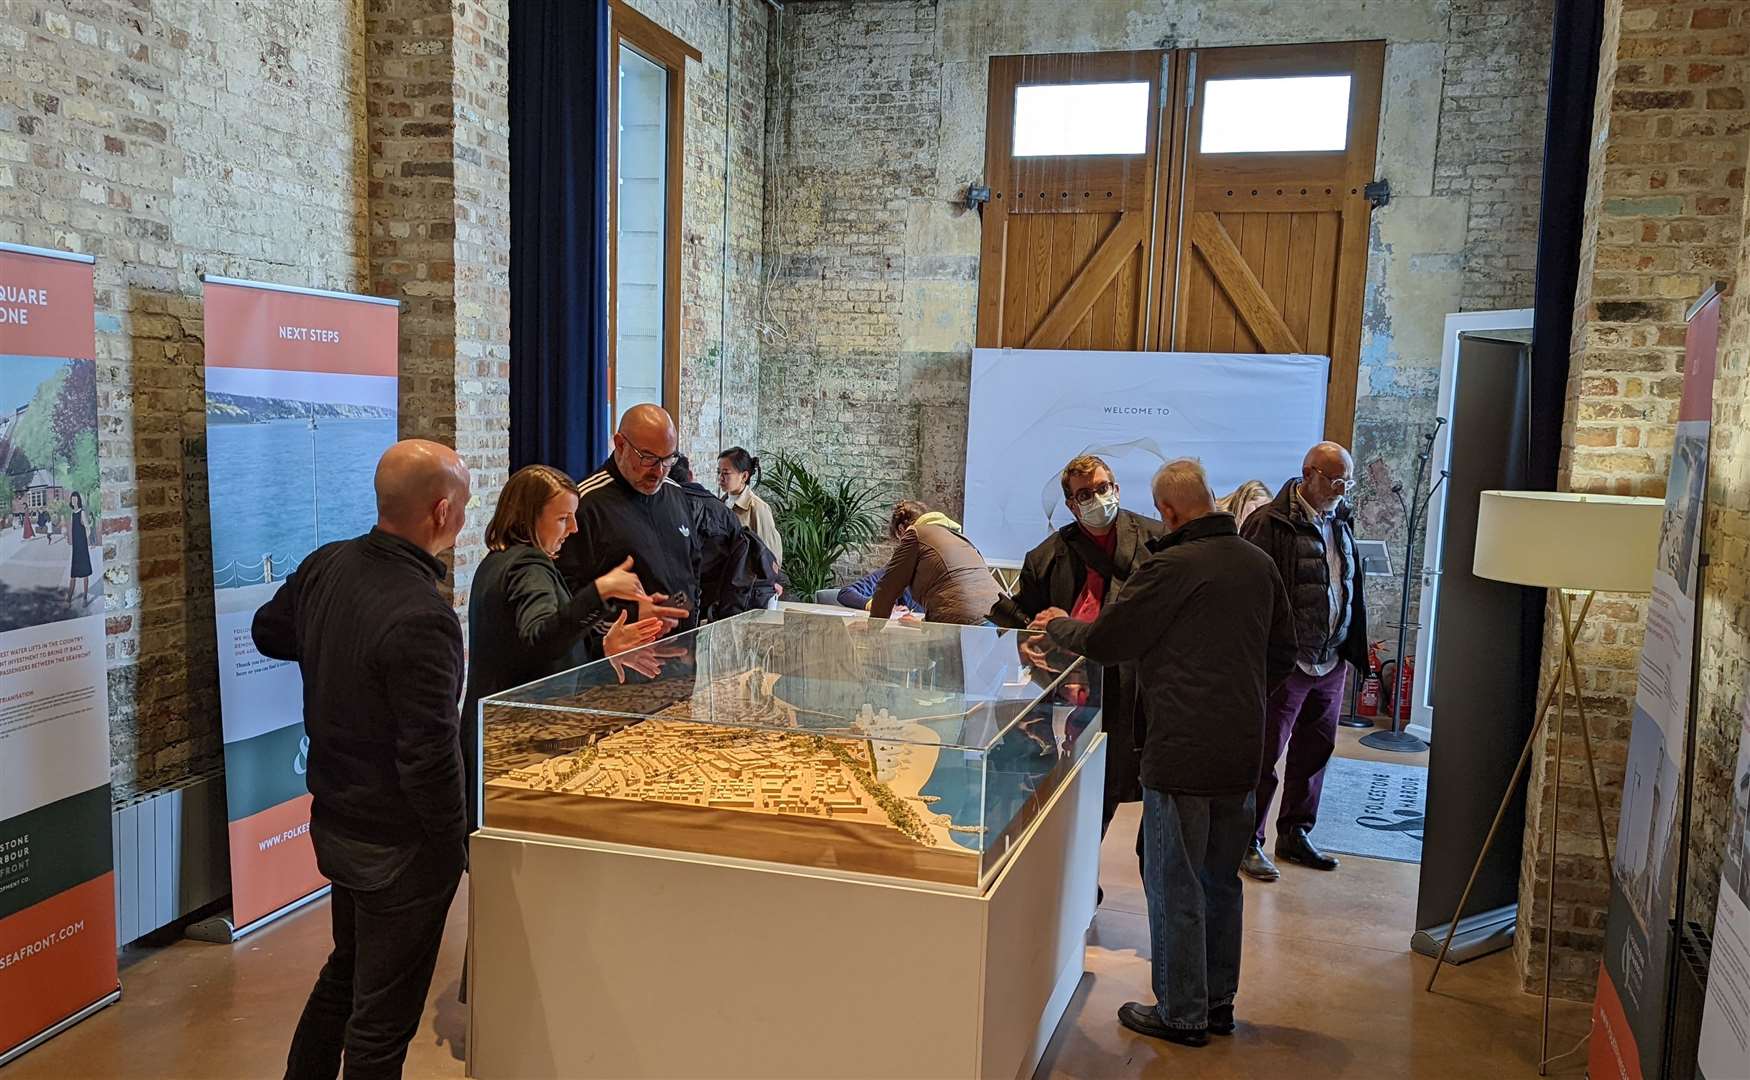 A public display took place as part of a consultation on the latest phase of Folkestone seafront redevelopment